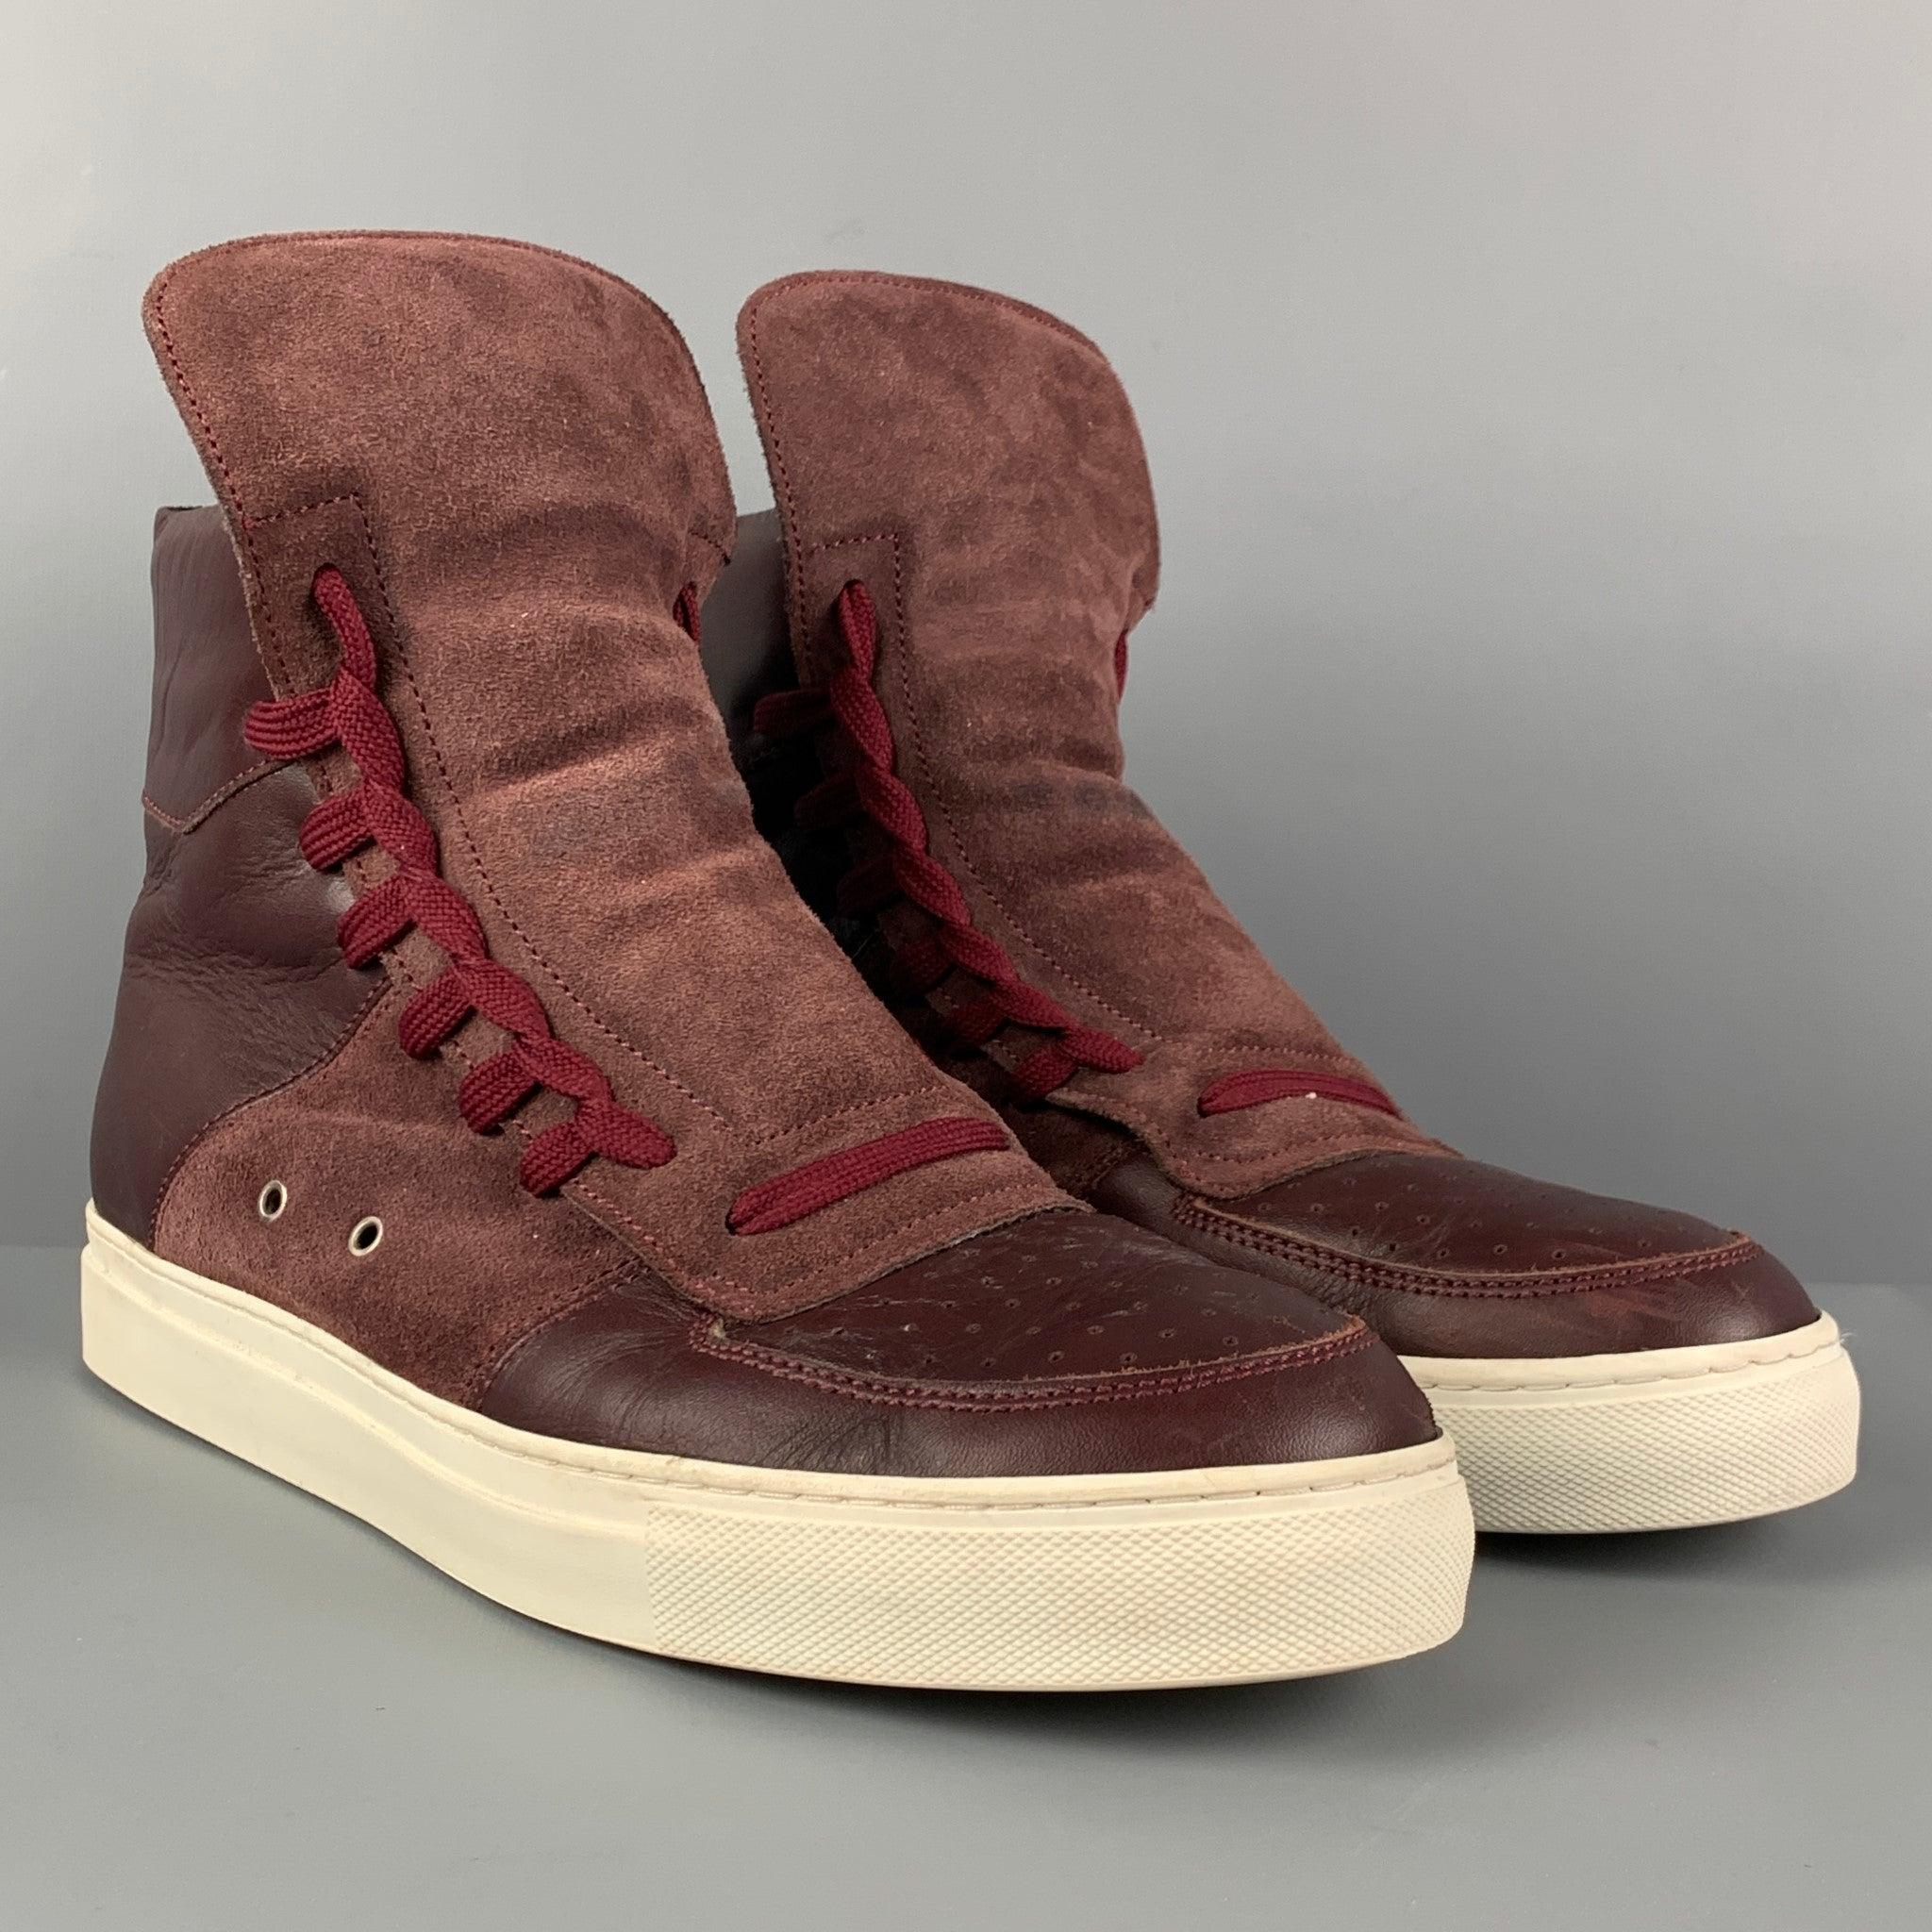 KRIS VAN ASSCHE sneakers comes in a burgundy leather with a suede panel featuring a high-top style, lace up detail closure, rubber sole, and a back zipper closure.
Very Good
Pre-Owned Condition. 

Marked:   42Outsole: 11.5 inches  x 4 inches 
  
  
